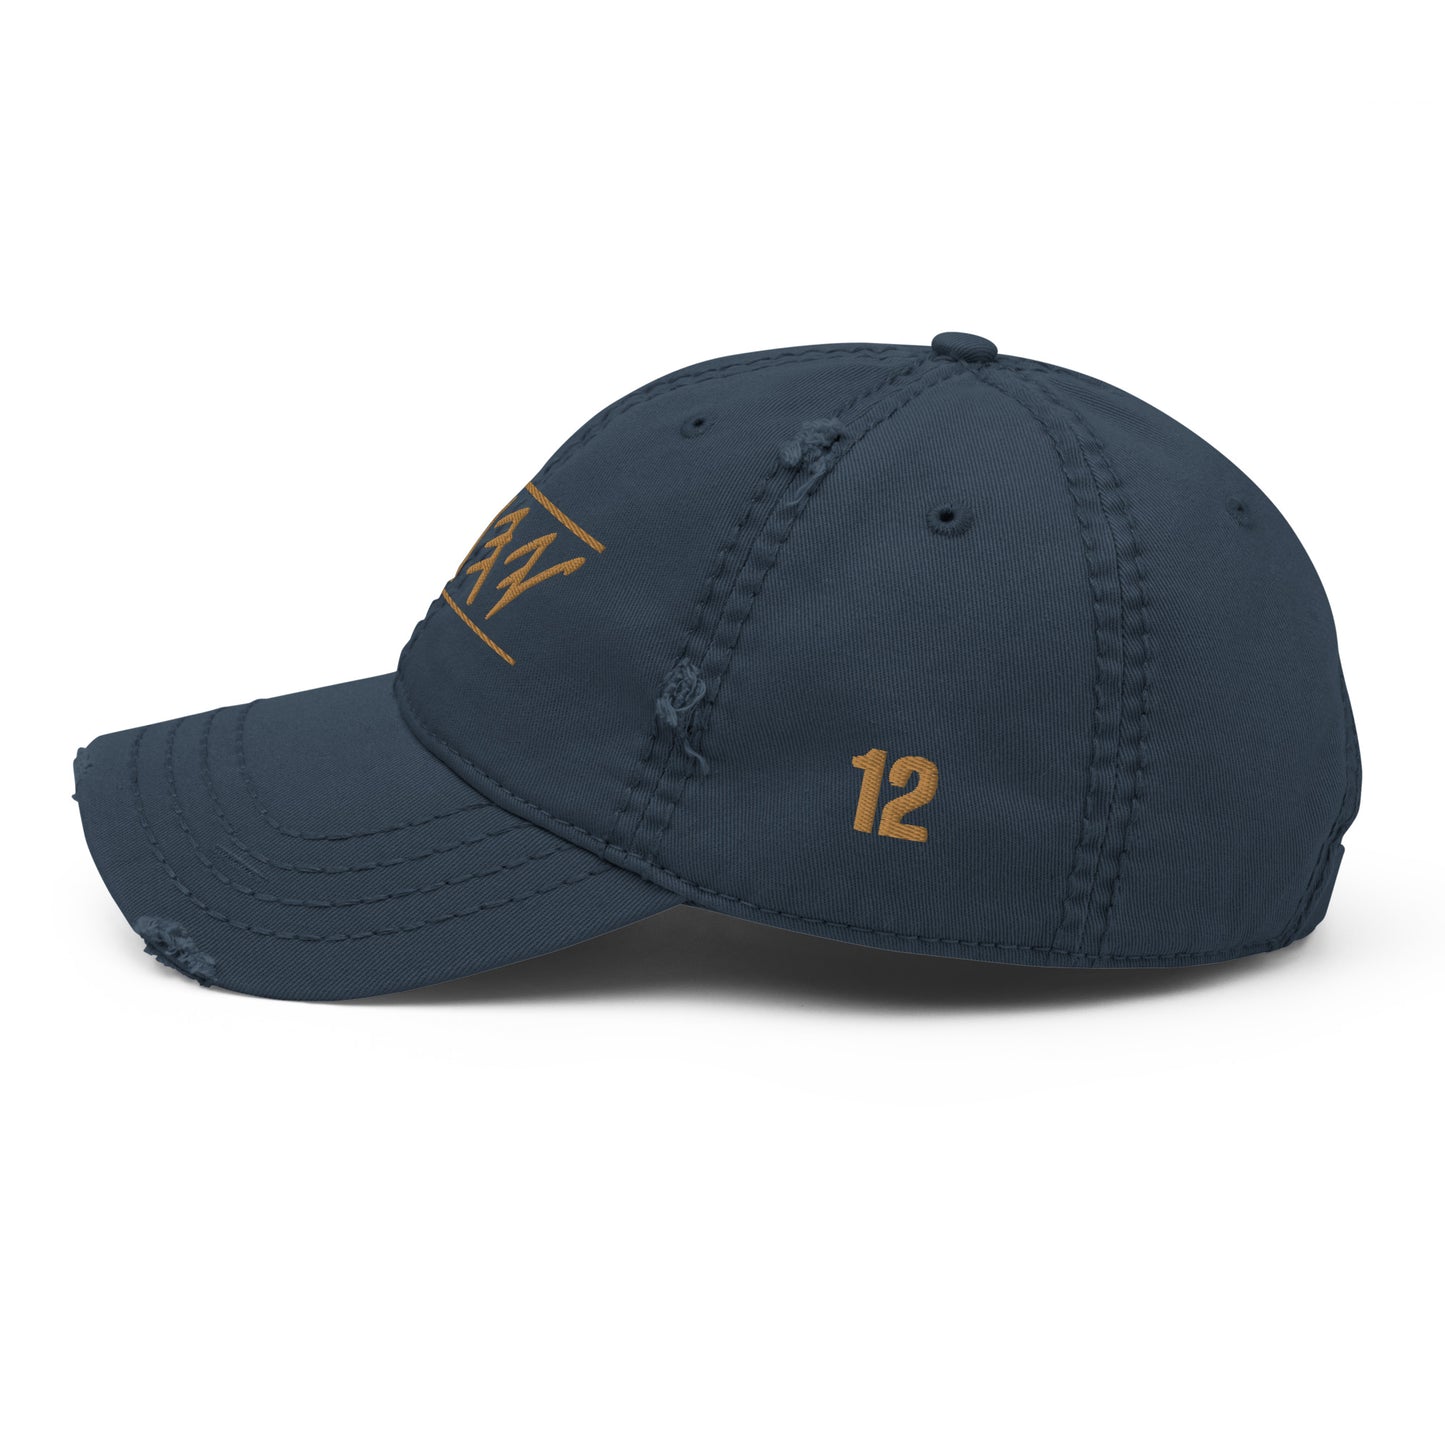 Yahuah Embroidered In Paleo Hebrew | Distressed Dad Hat